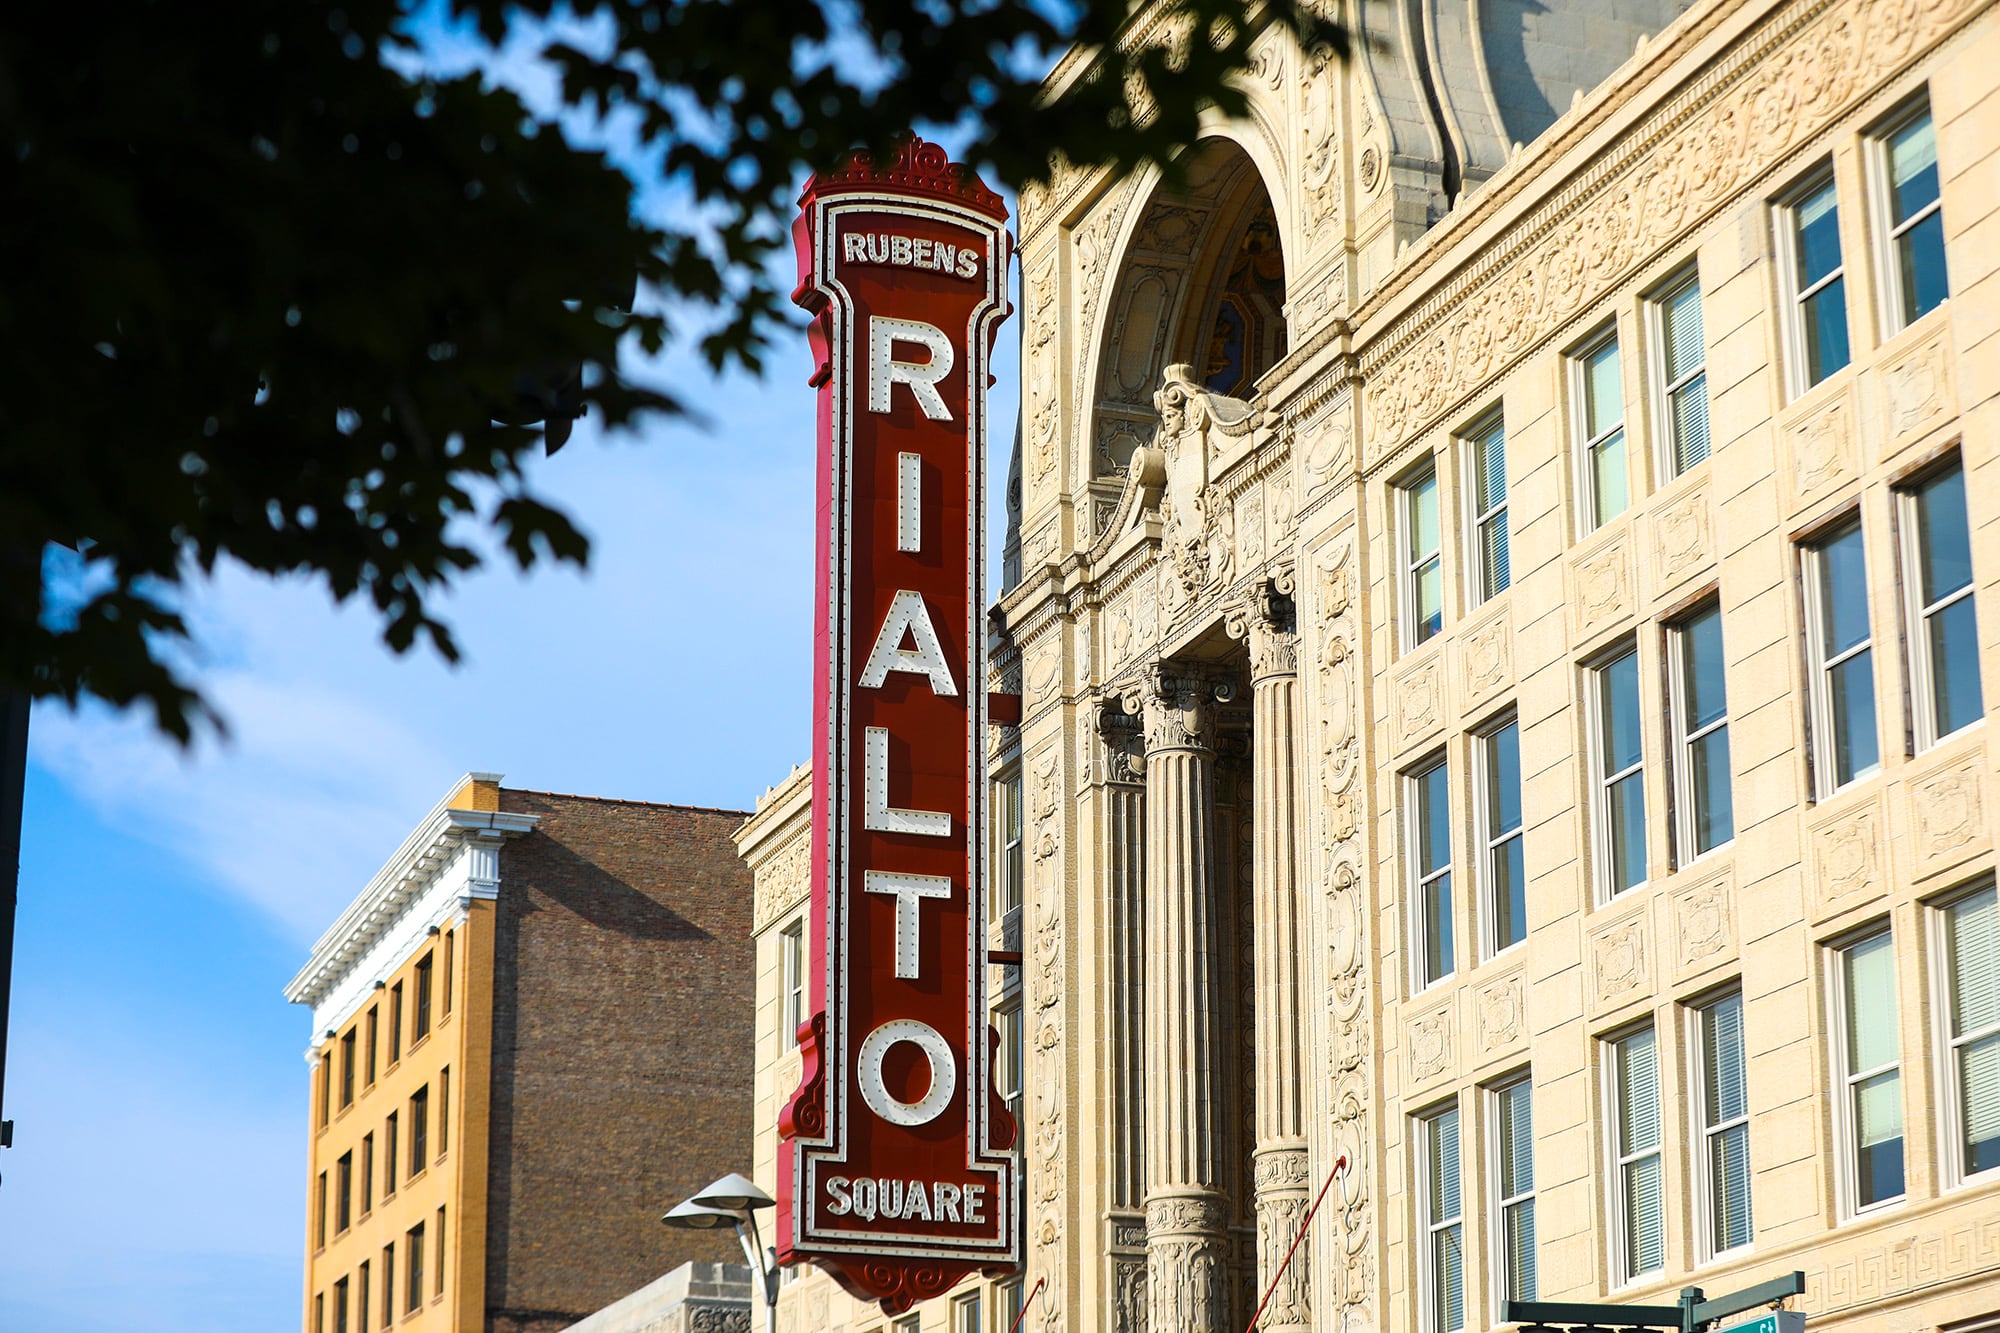  Rialto Theatre in Joliet working with state authorities on asbestos removal issue